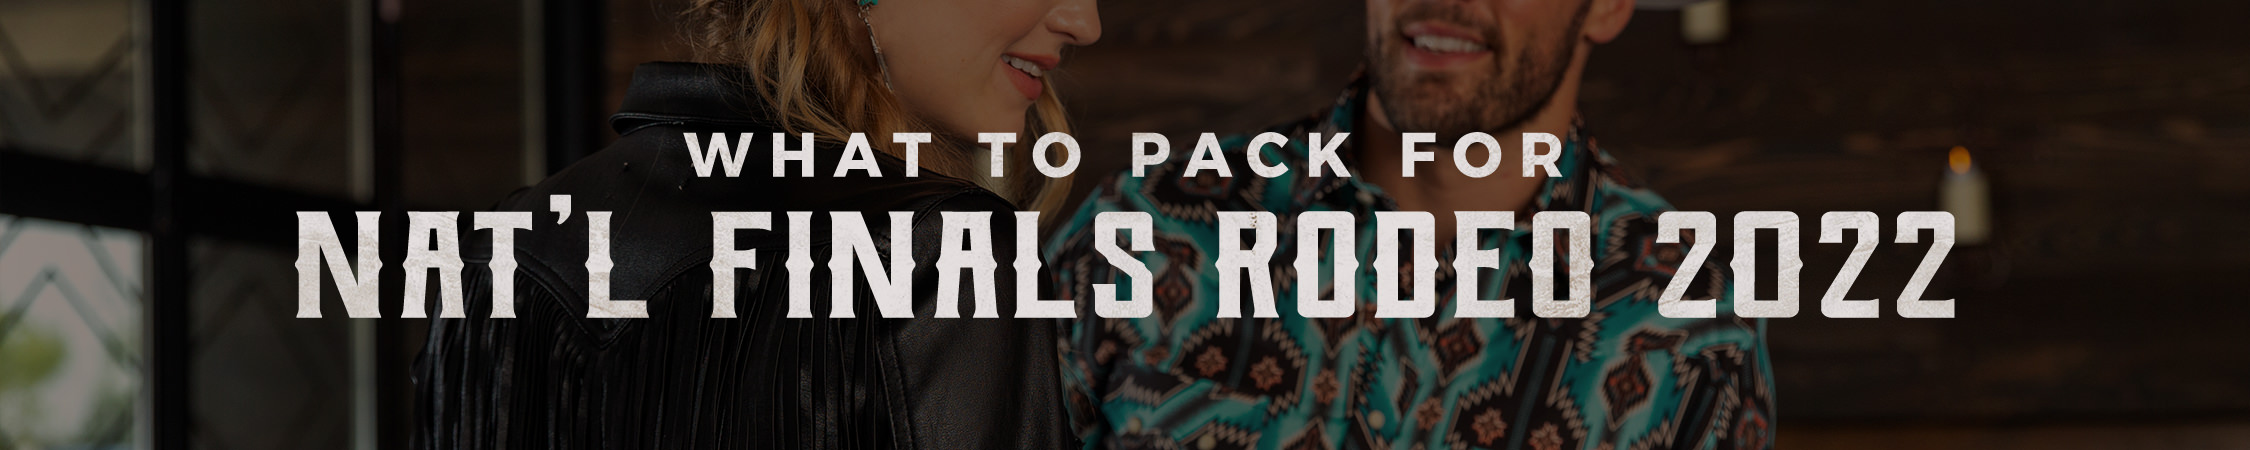 What to Pack for National Finals Rodeo 2022